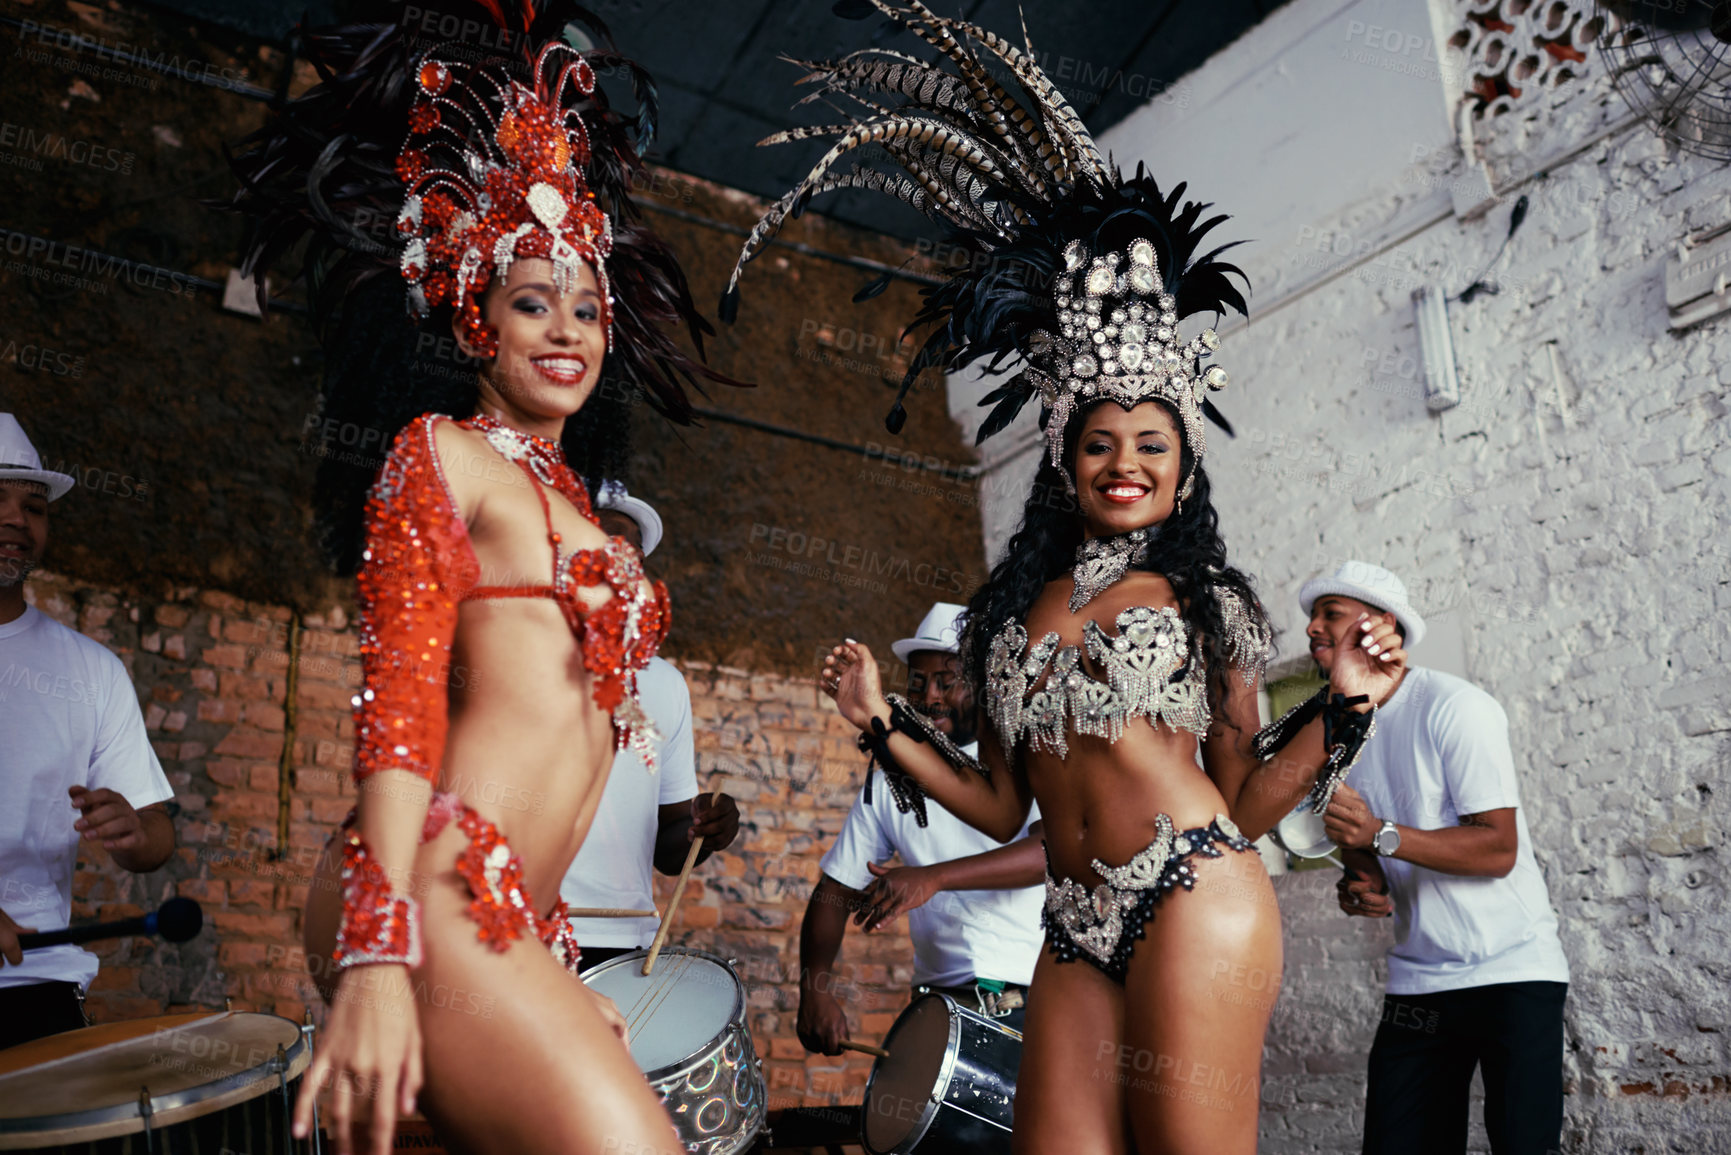 Buy stock photo Portrait, dance and women at carnival in costume for celebration, music culture and happy band in Brazil. Samba, party and friends together with smile at festival, parade or show in Rio de Janeiro 